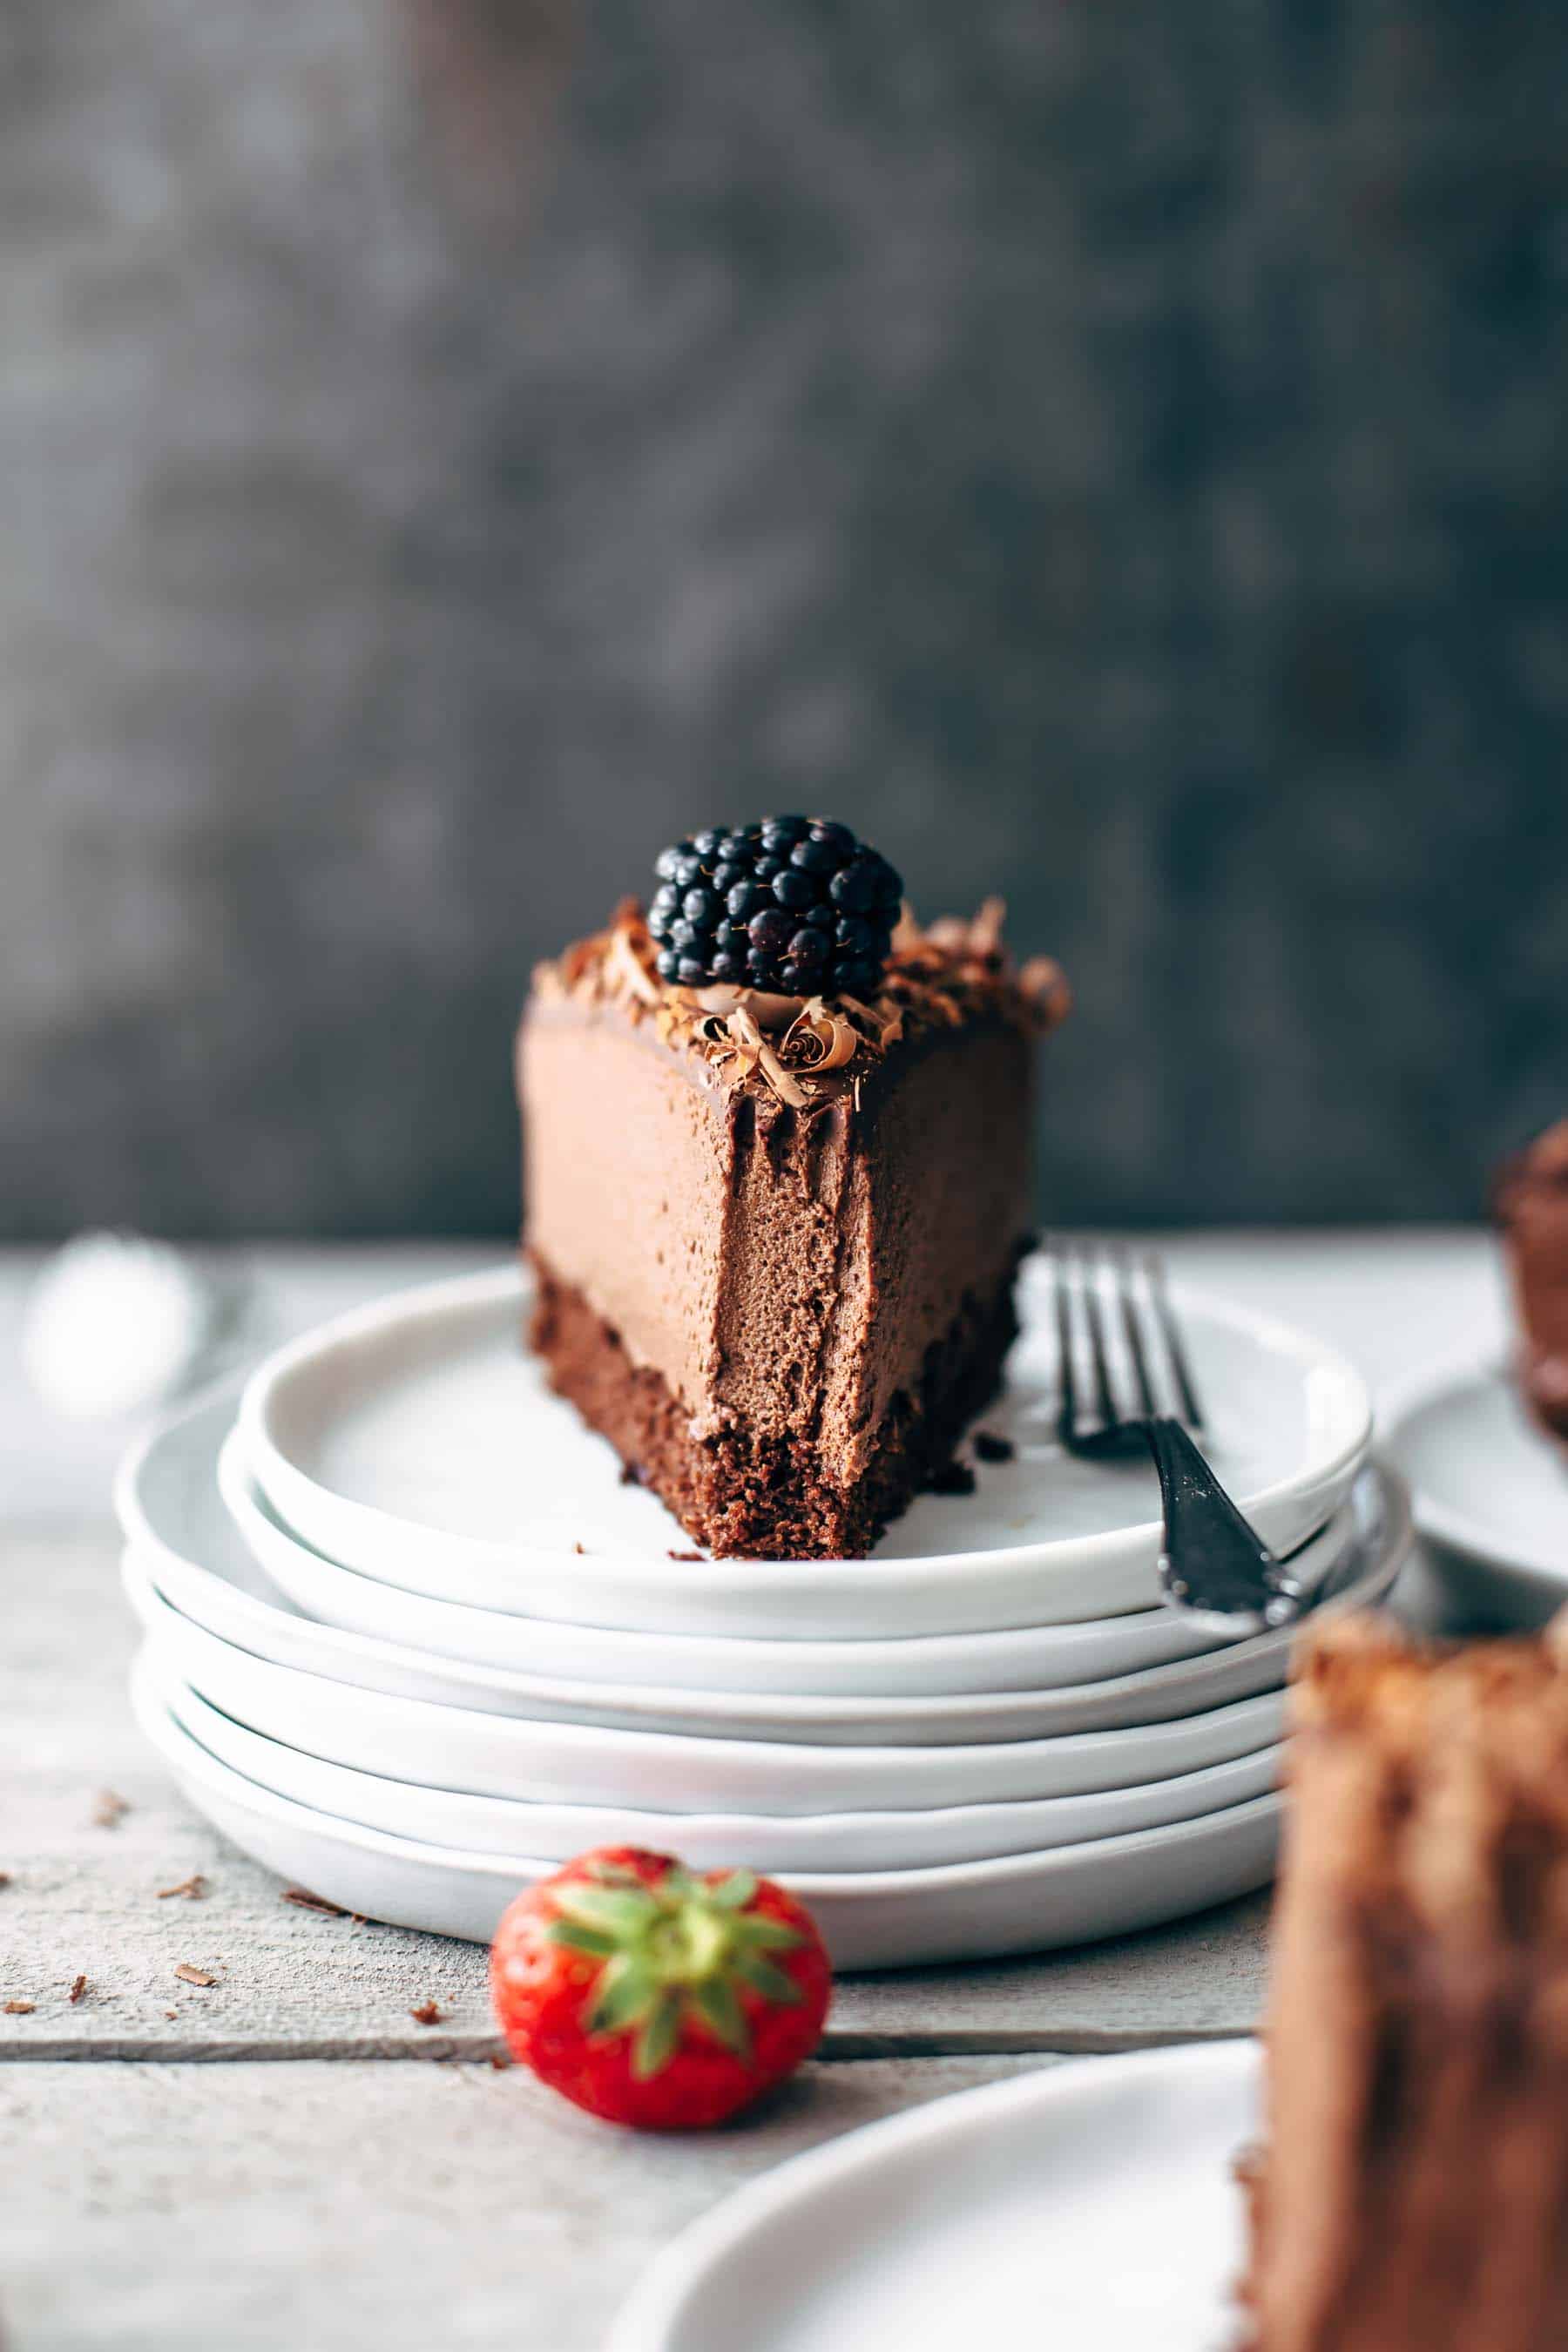 a slice of chocolate cake with a blackberry on top on a pile of stacked dessert plates